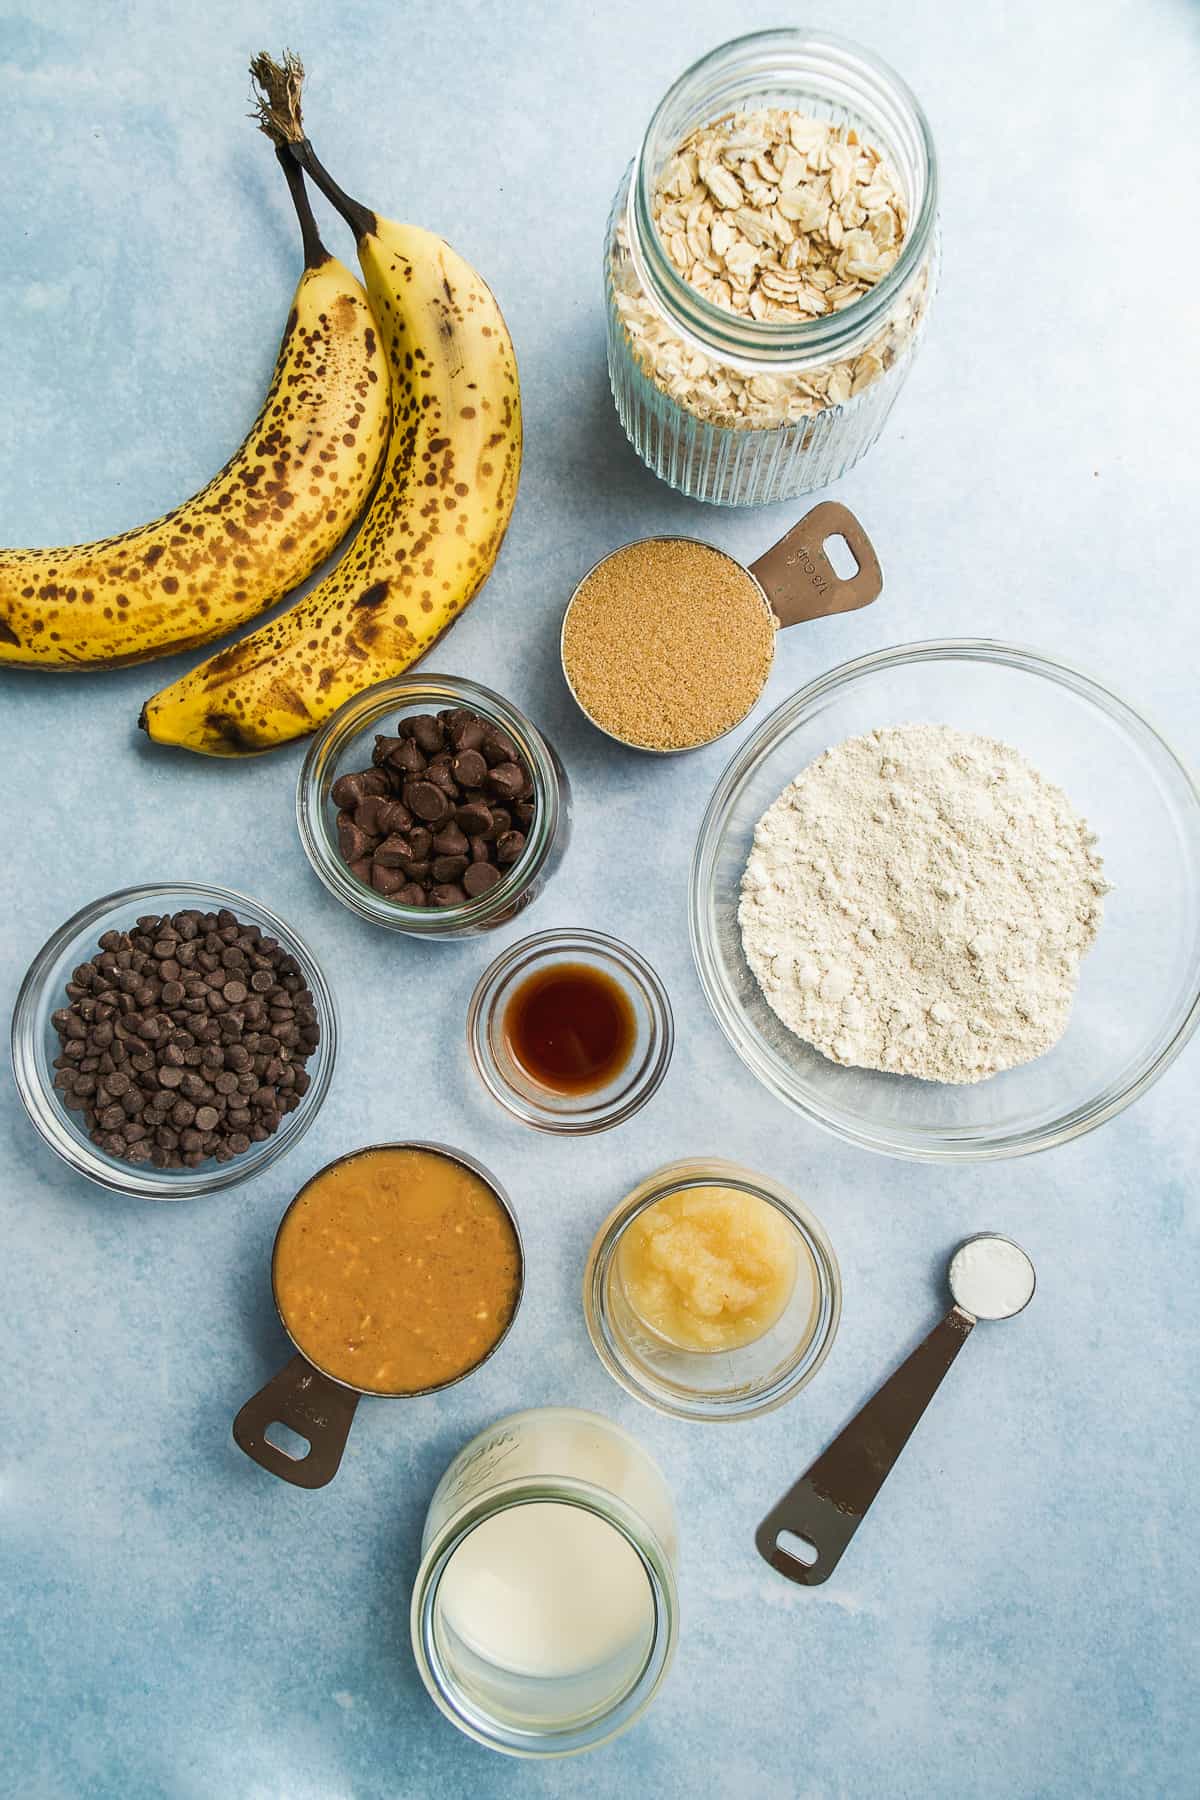 Image of peanut butter banana oatmeal cookie ingredients on a blue surface.